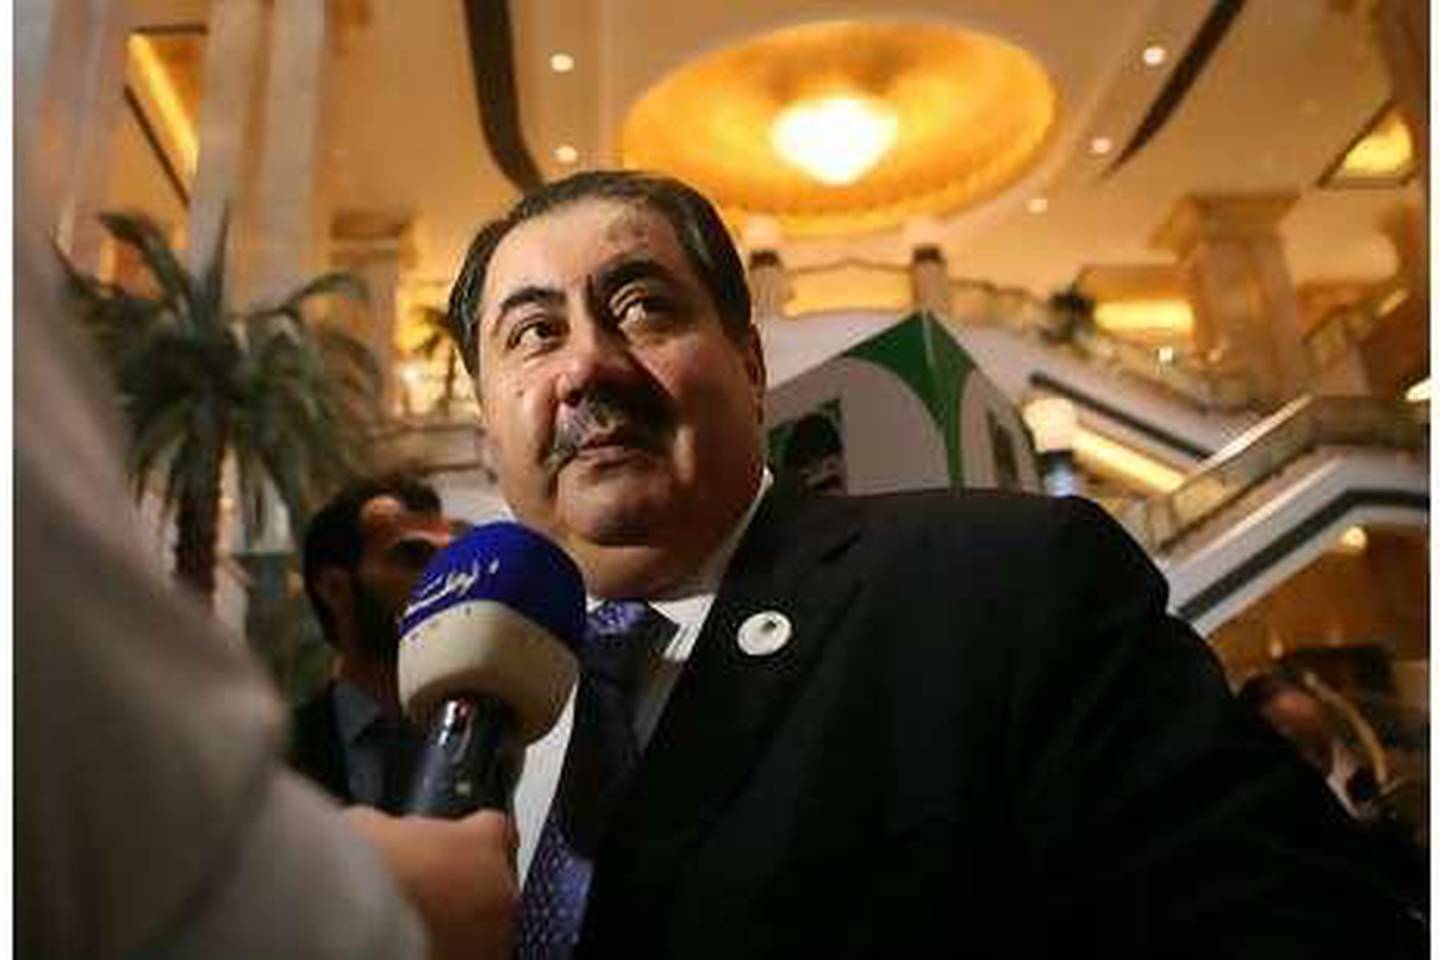 Hoshyar Zebari, the former Iraqi foreign minister, is interviewed during a break at the Future Forum conference in Abu Dhabi. The National